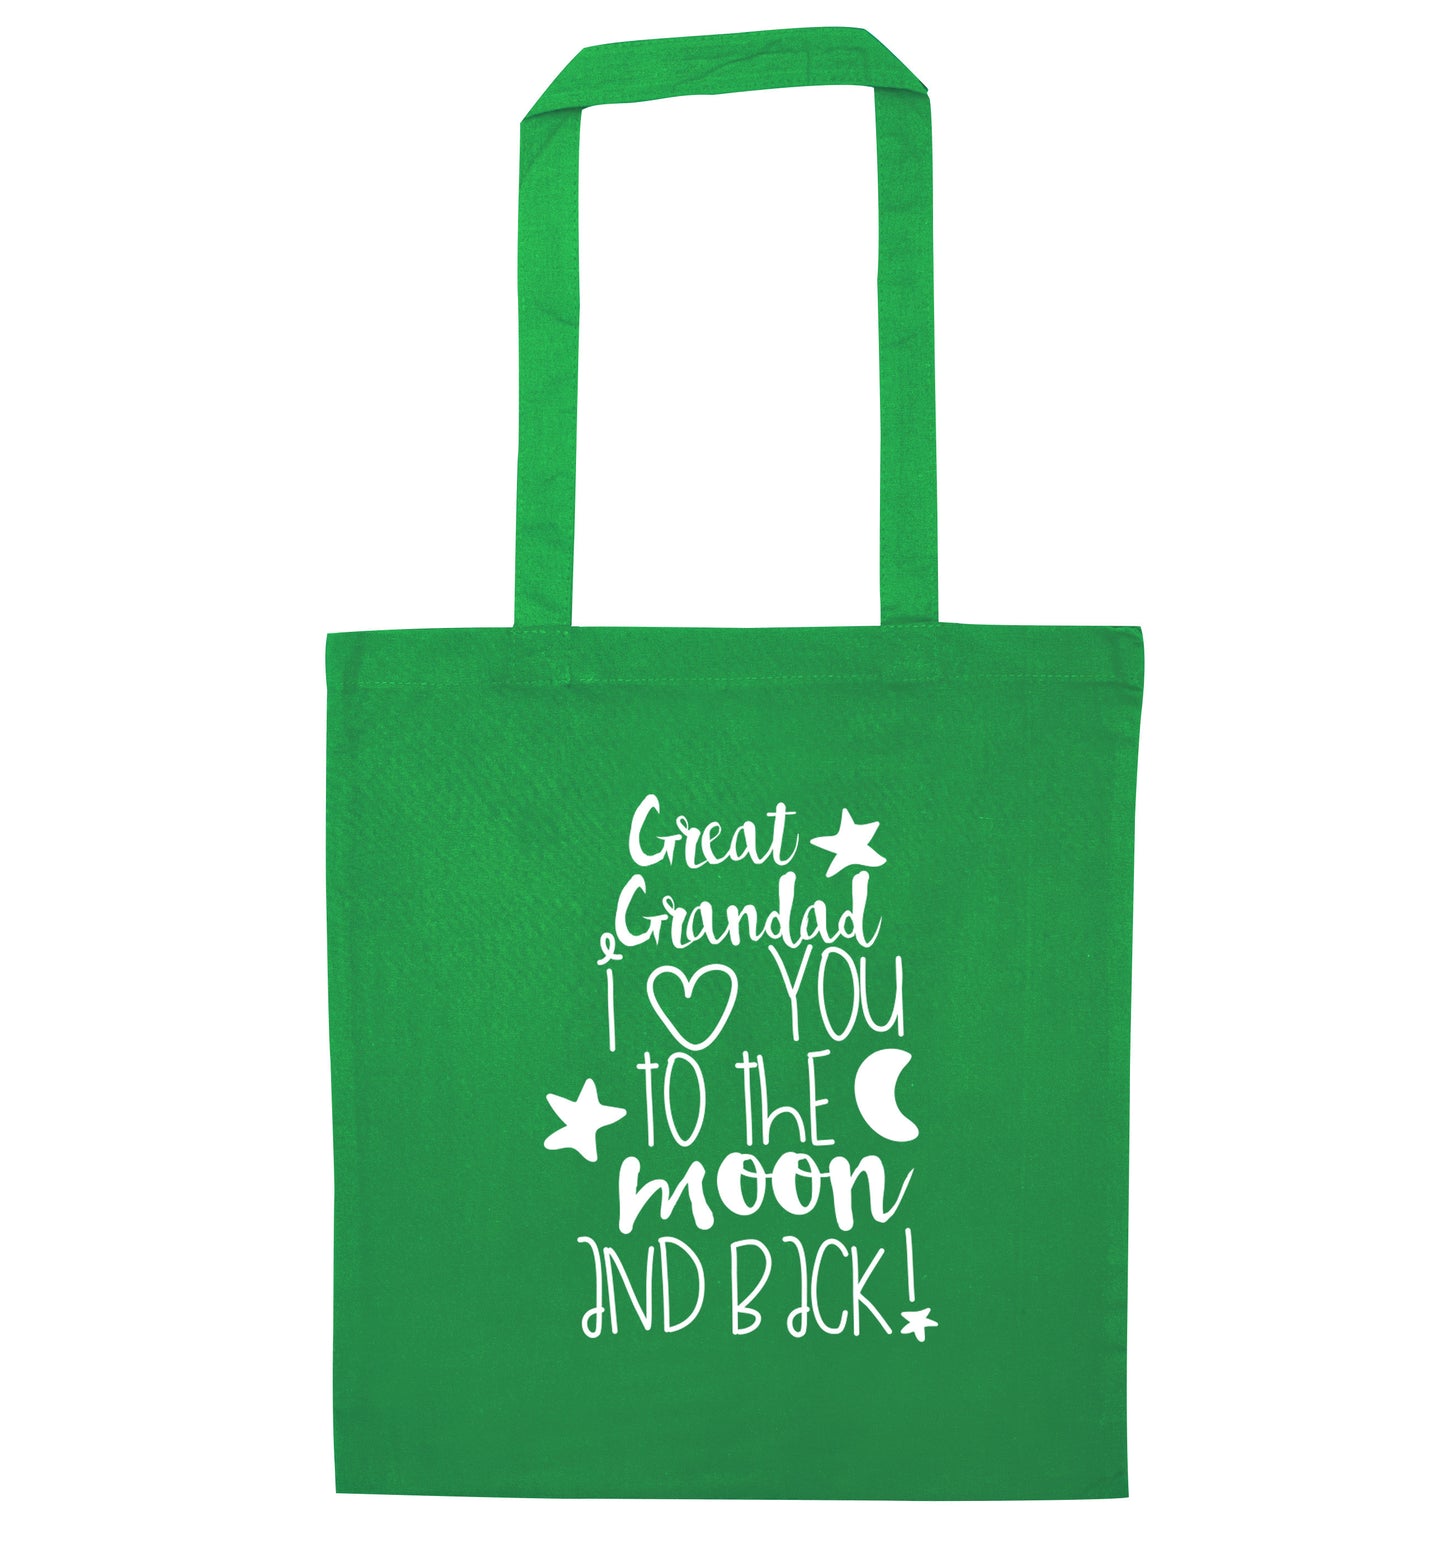 Great Grandad I love you to the moon and back green tote bag